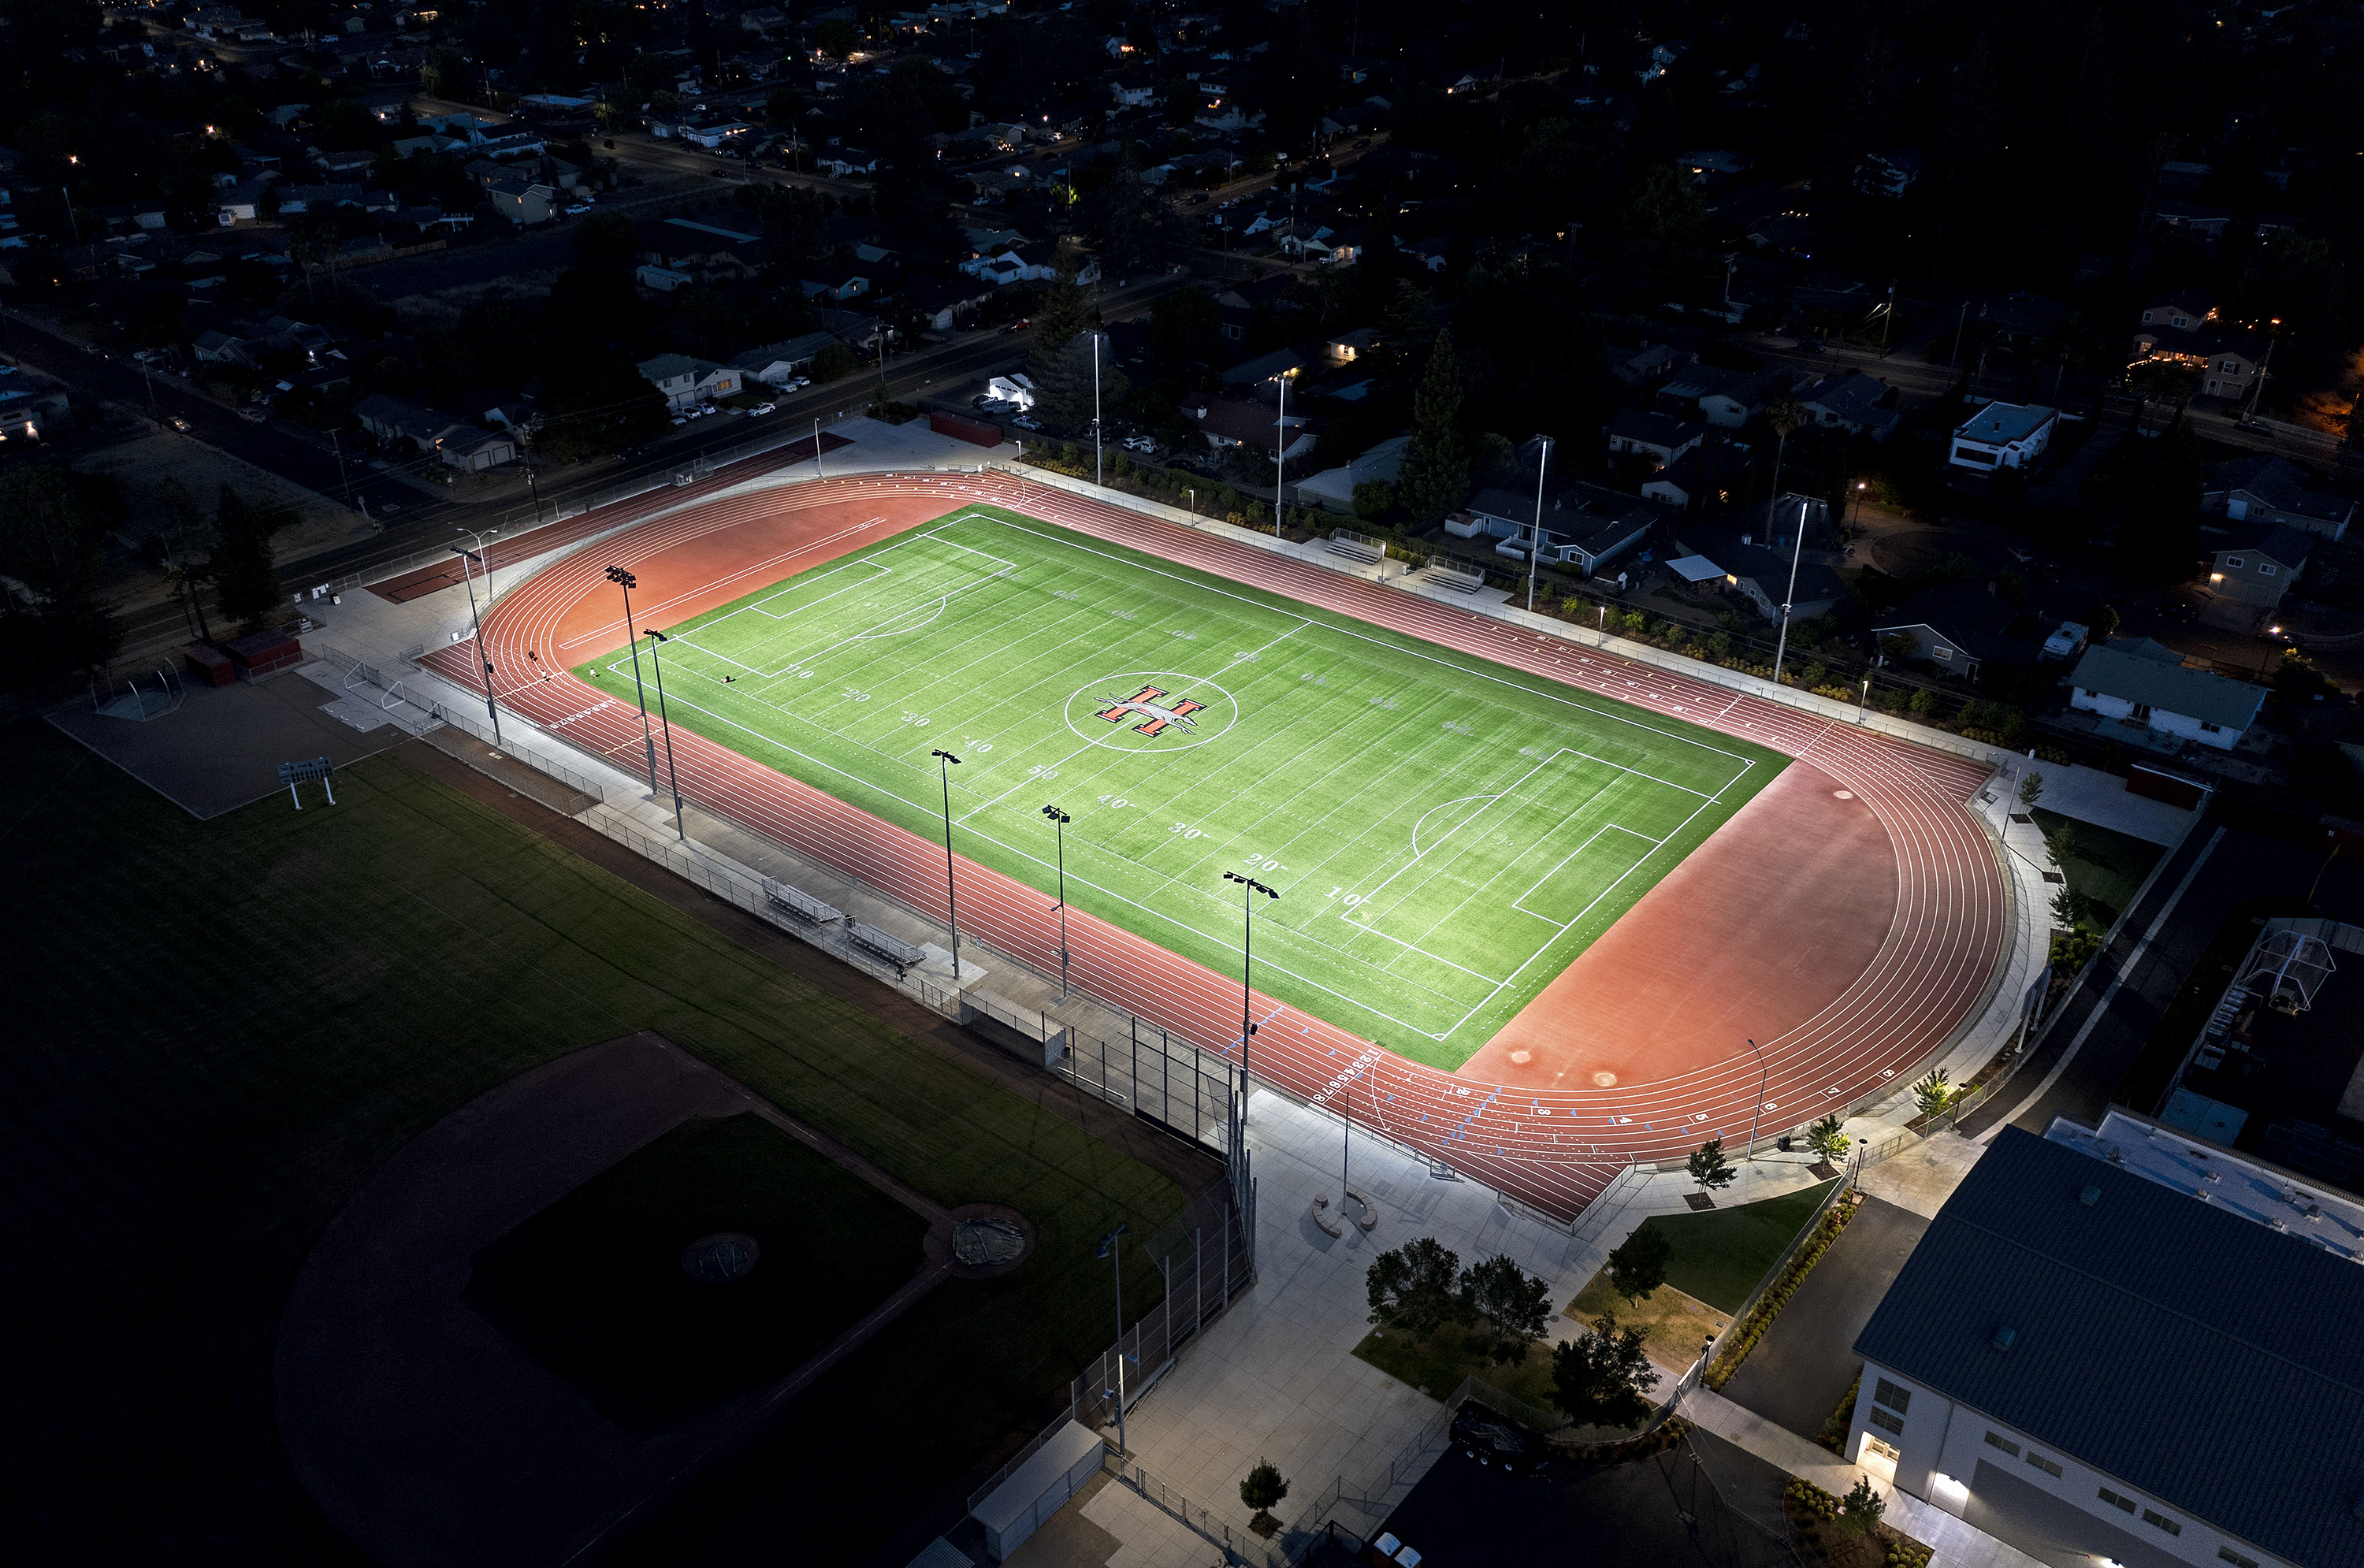 Football field with lighting and minimal spillage to the houses in proximity